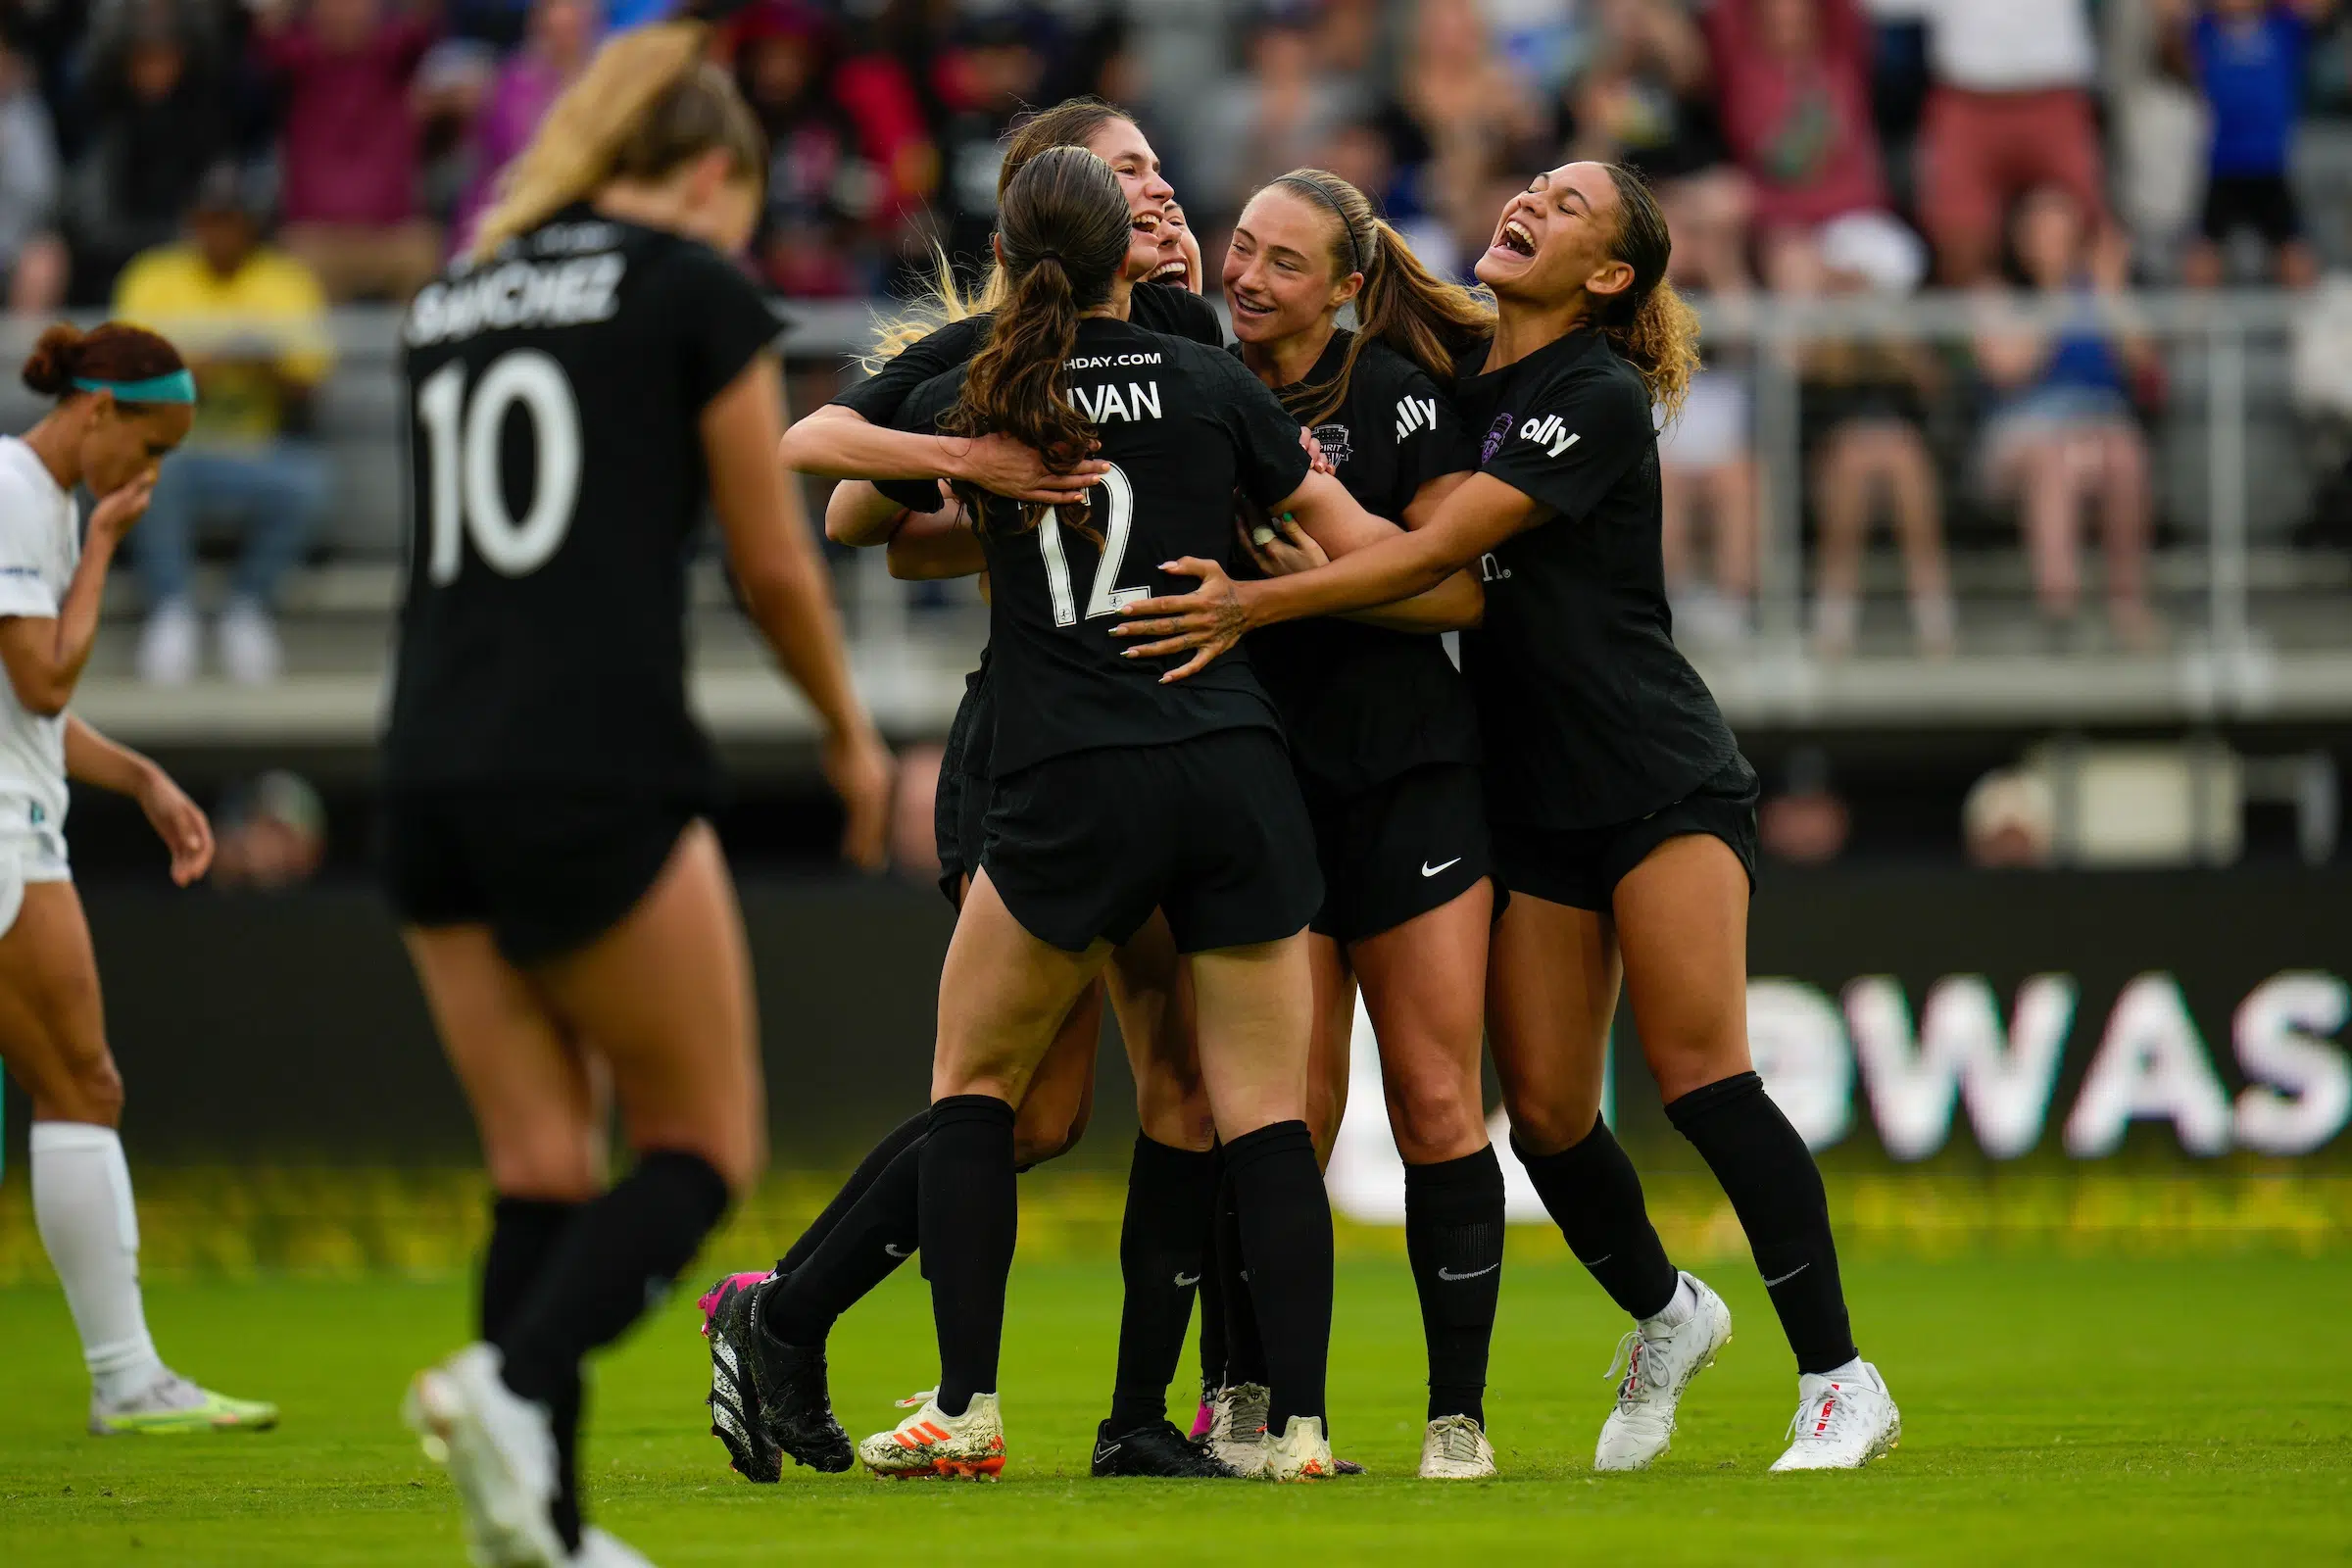 Six soccer players in black uniforms smile and hug in celebration after a goal.